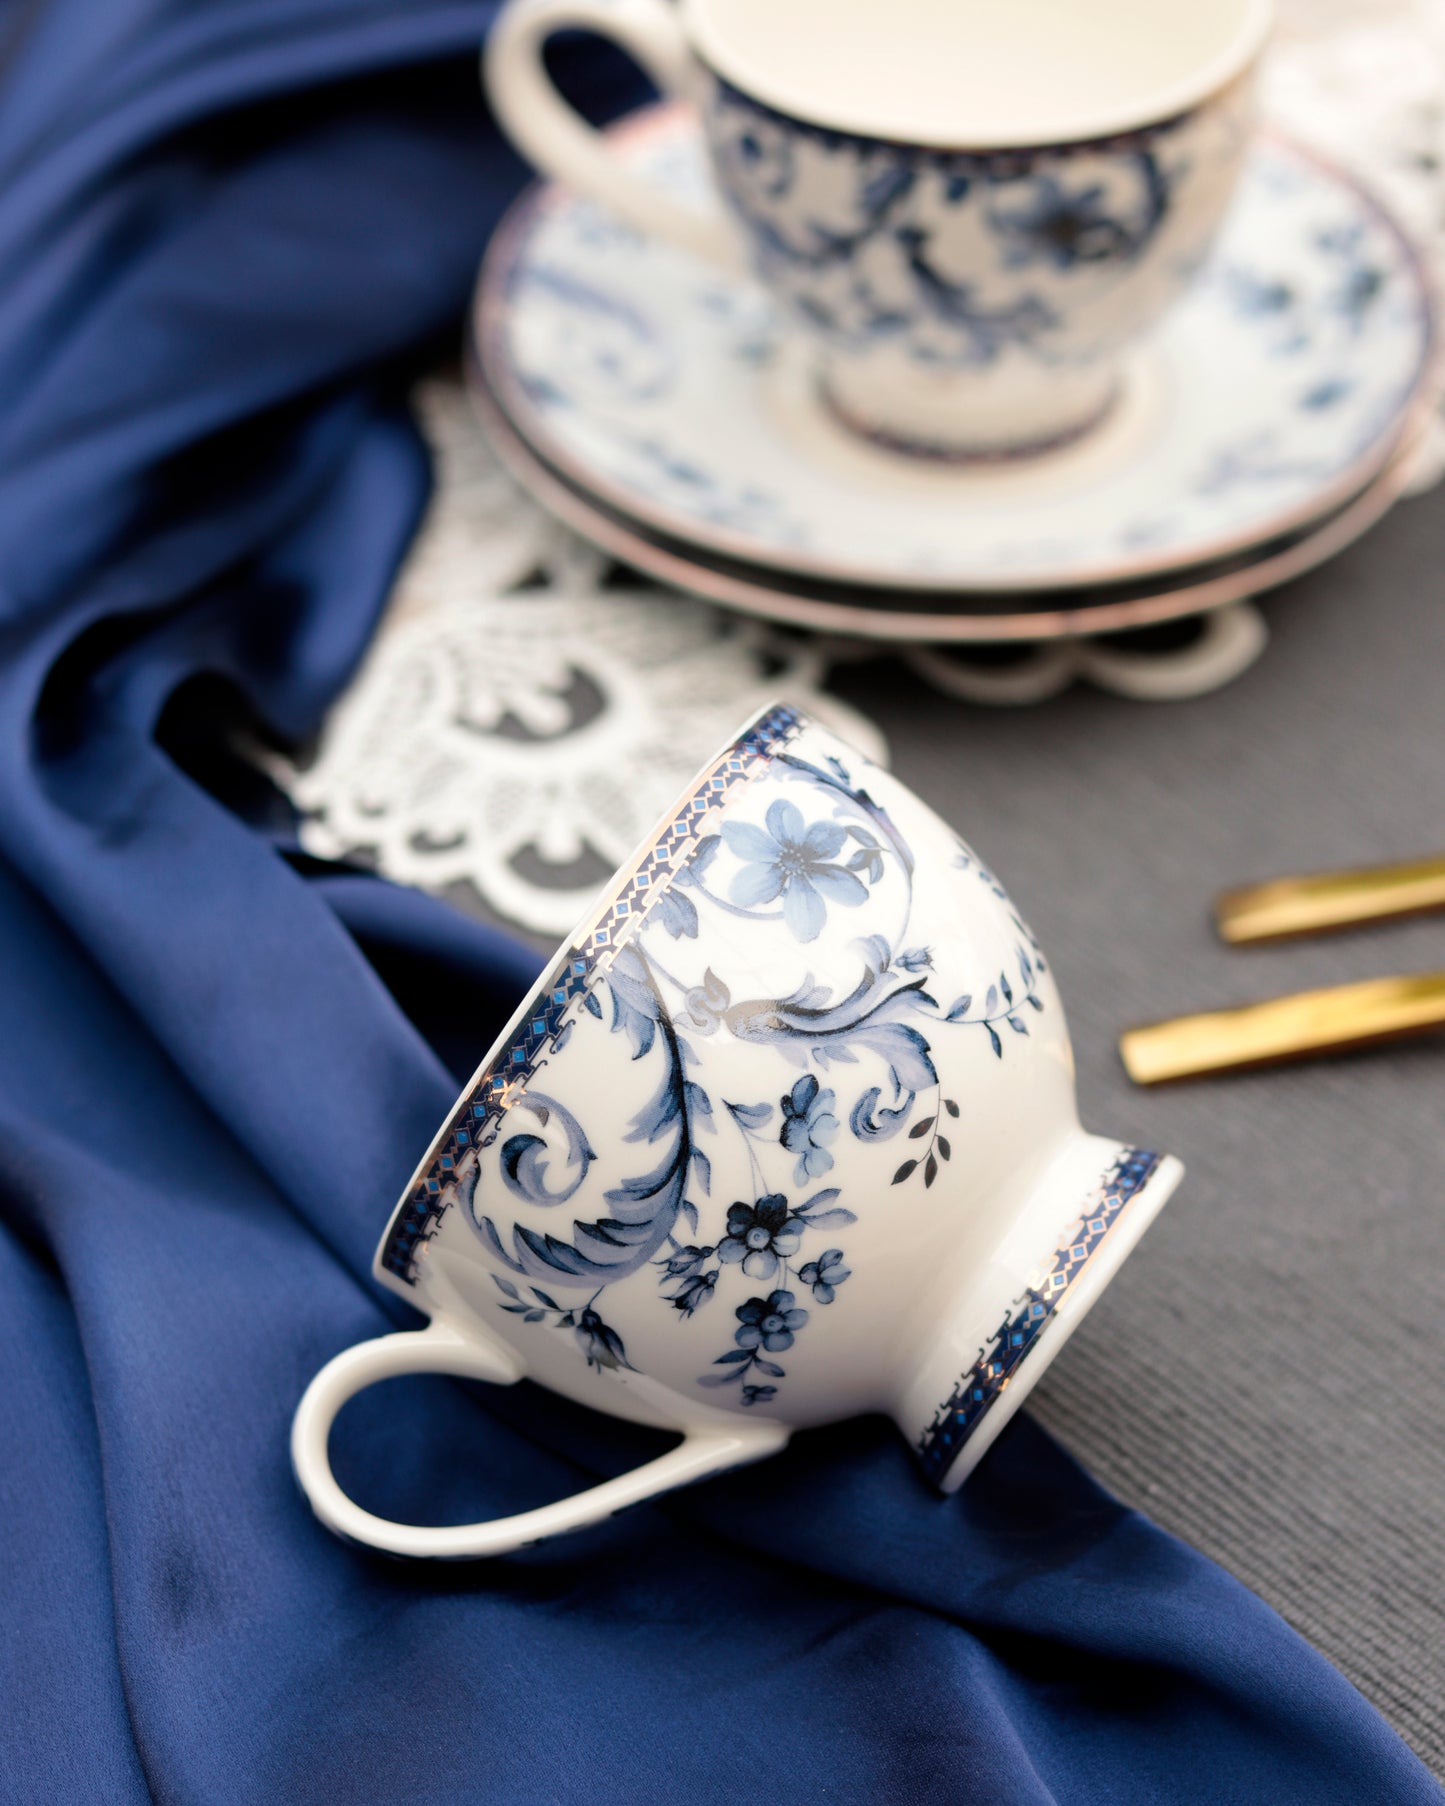 Midnight Blue Cup and Saucer Set (6 Cups and 6 Saucers) - Vigneto